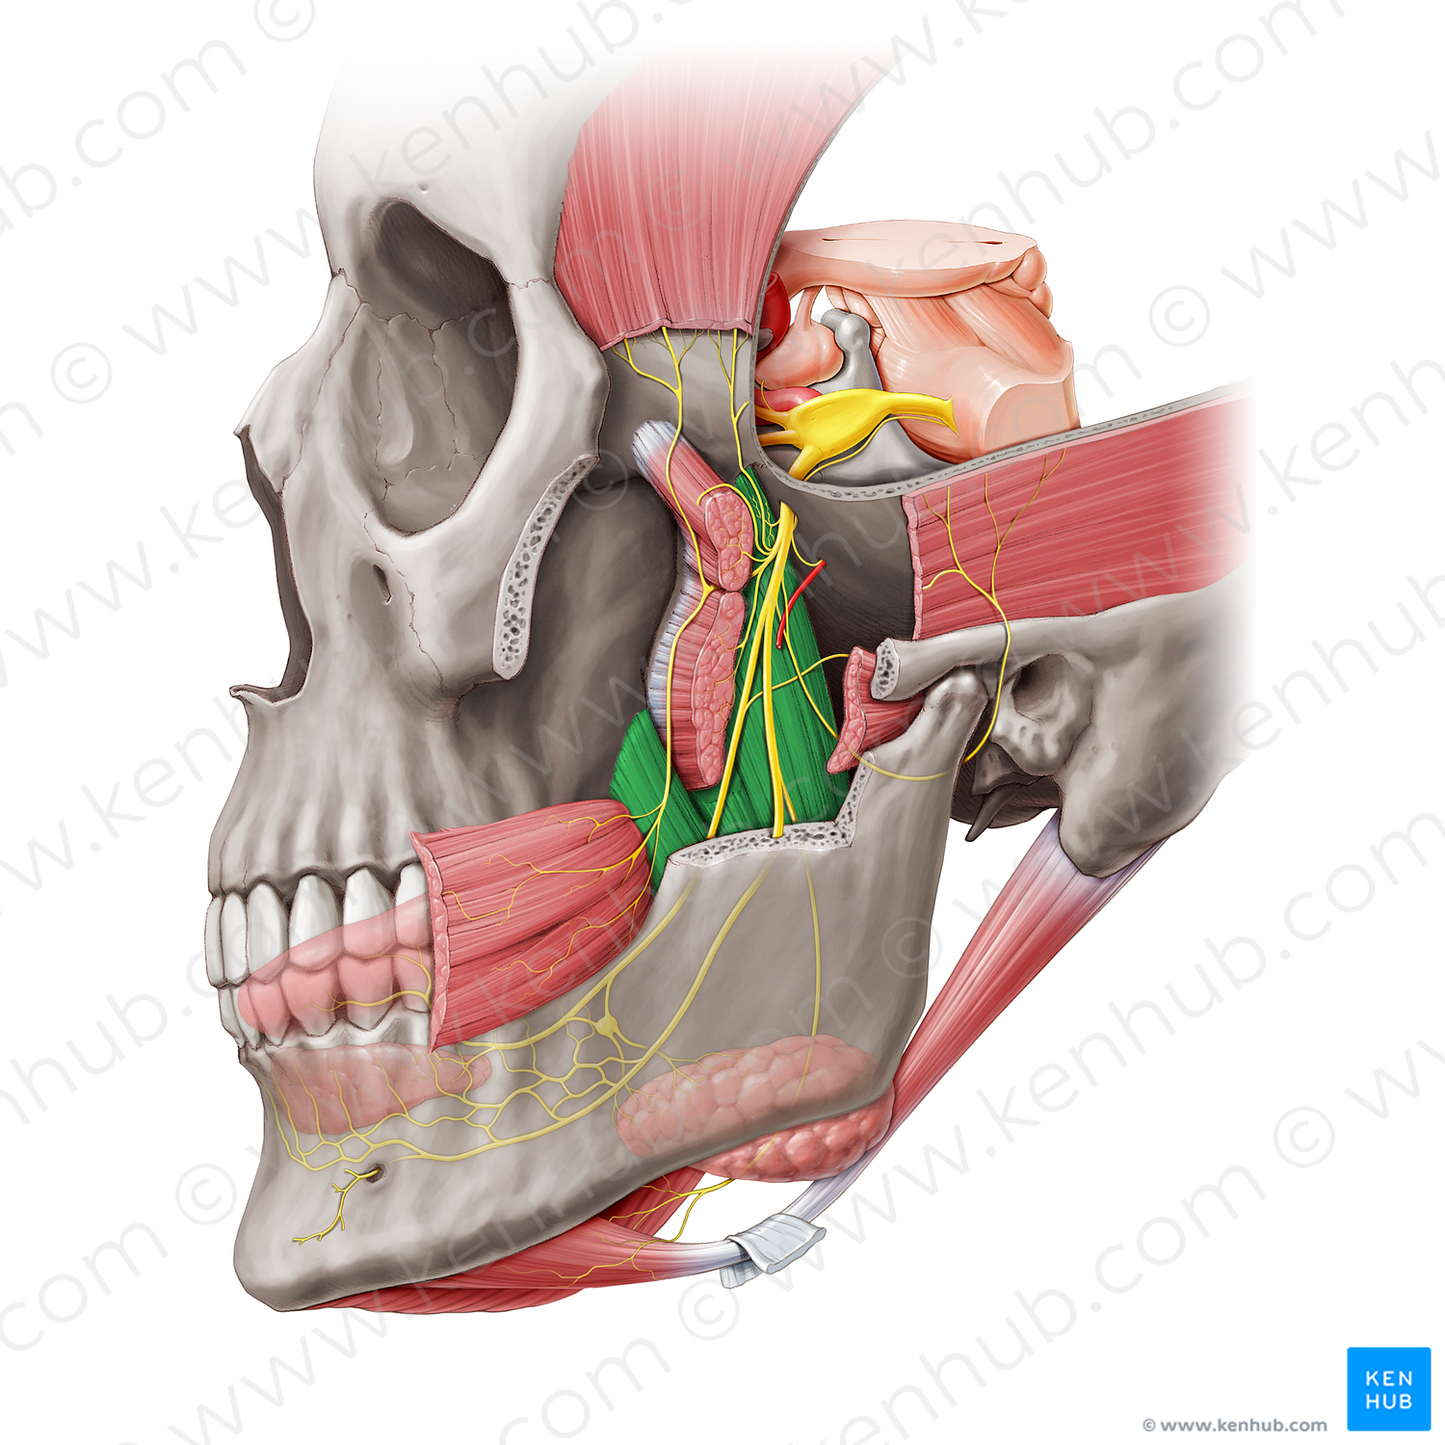 Medial pterygoid muscle (#20474)